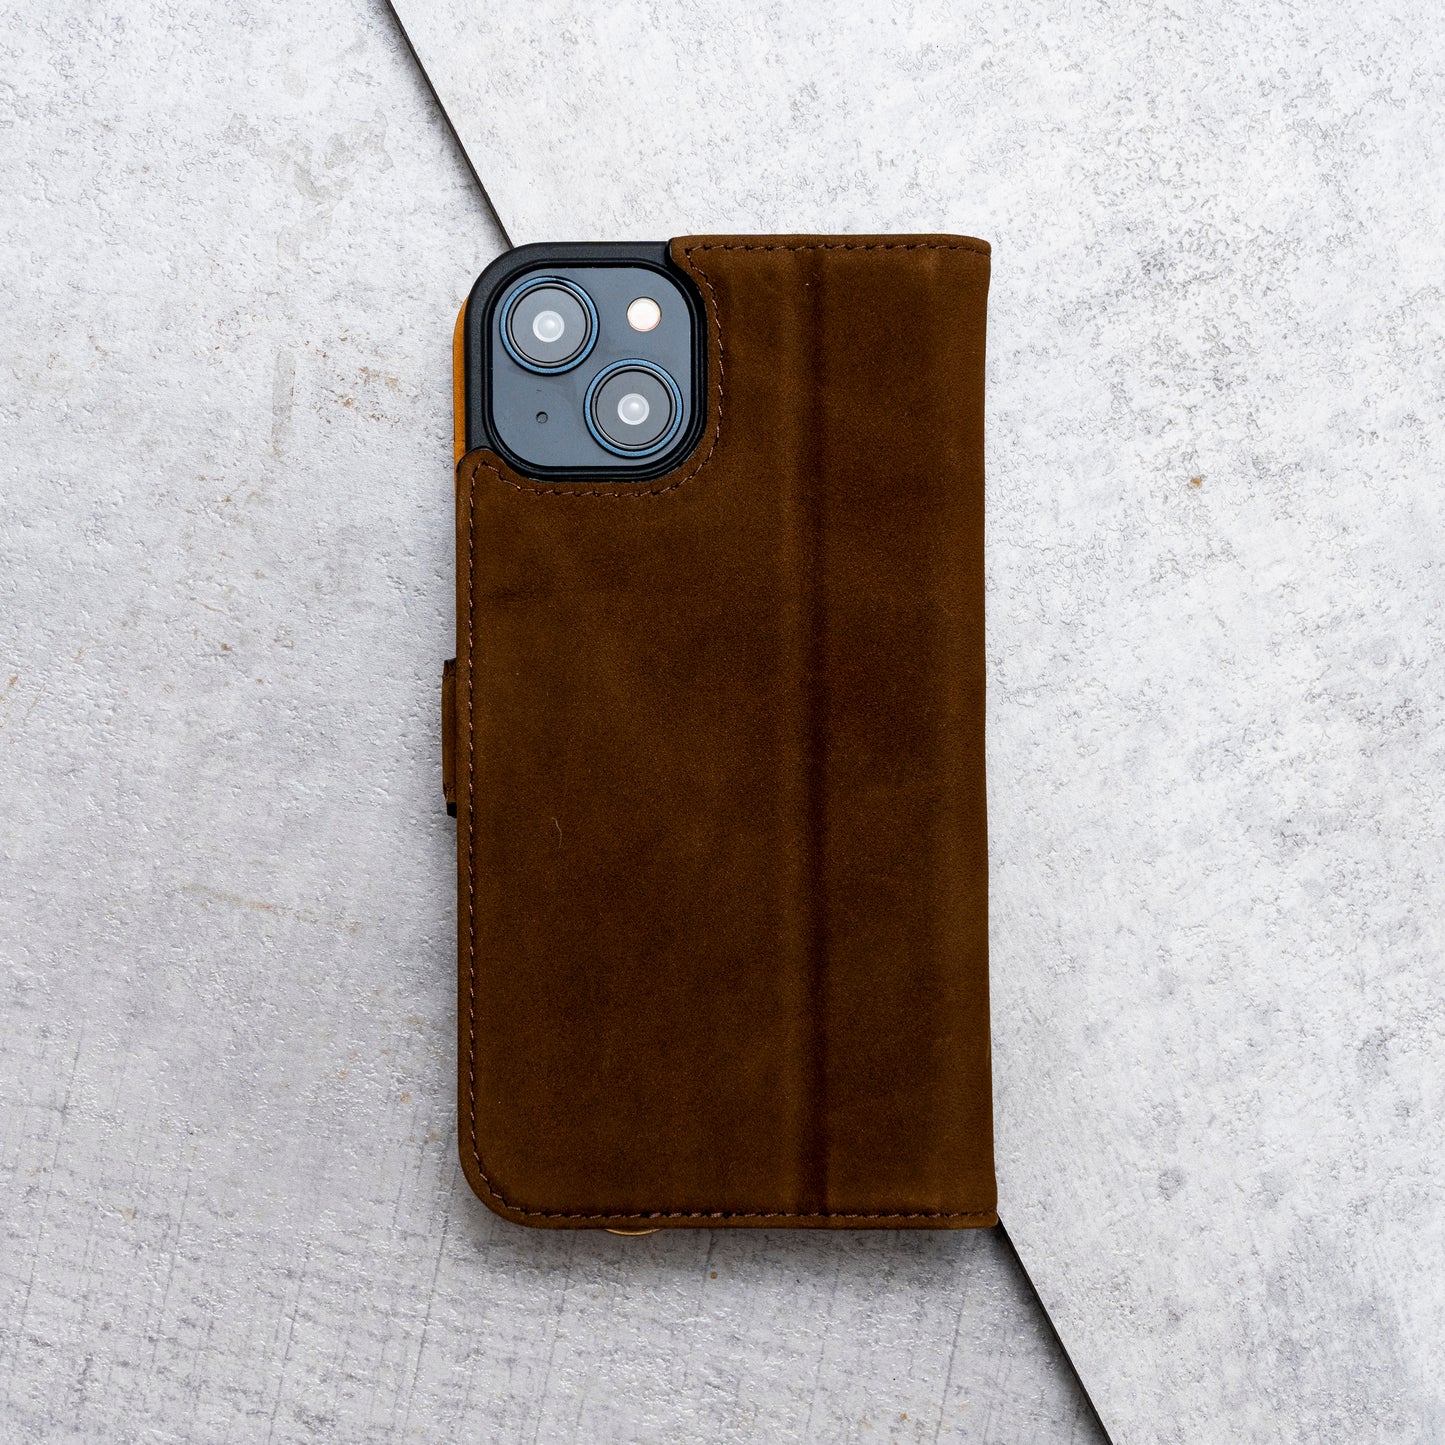 iPhone 14 Leather Case. Premium Nubuck Genuine Leather Stand Case/Cover/Wallet (Chocolate Brown)